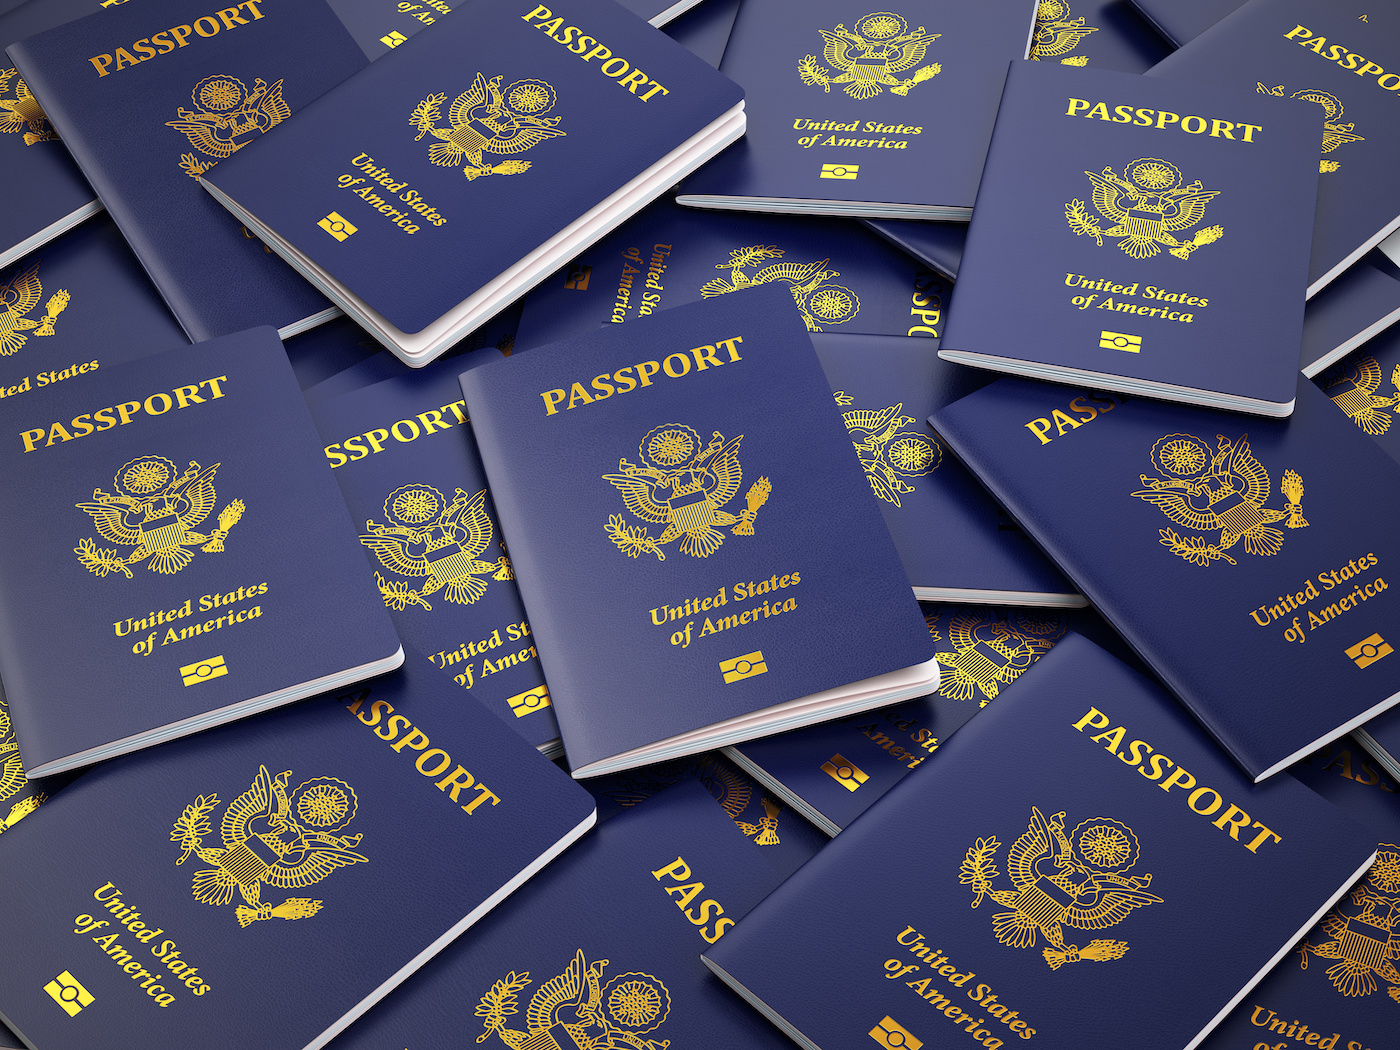 How Are US Passports Processed? Here is an Easy Infographic to Show How It Is Done Running